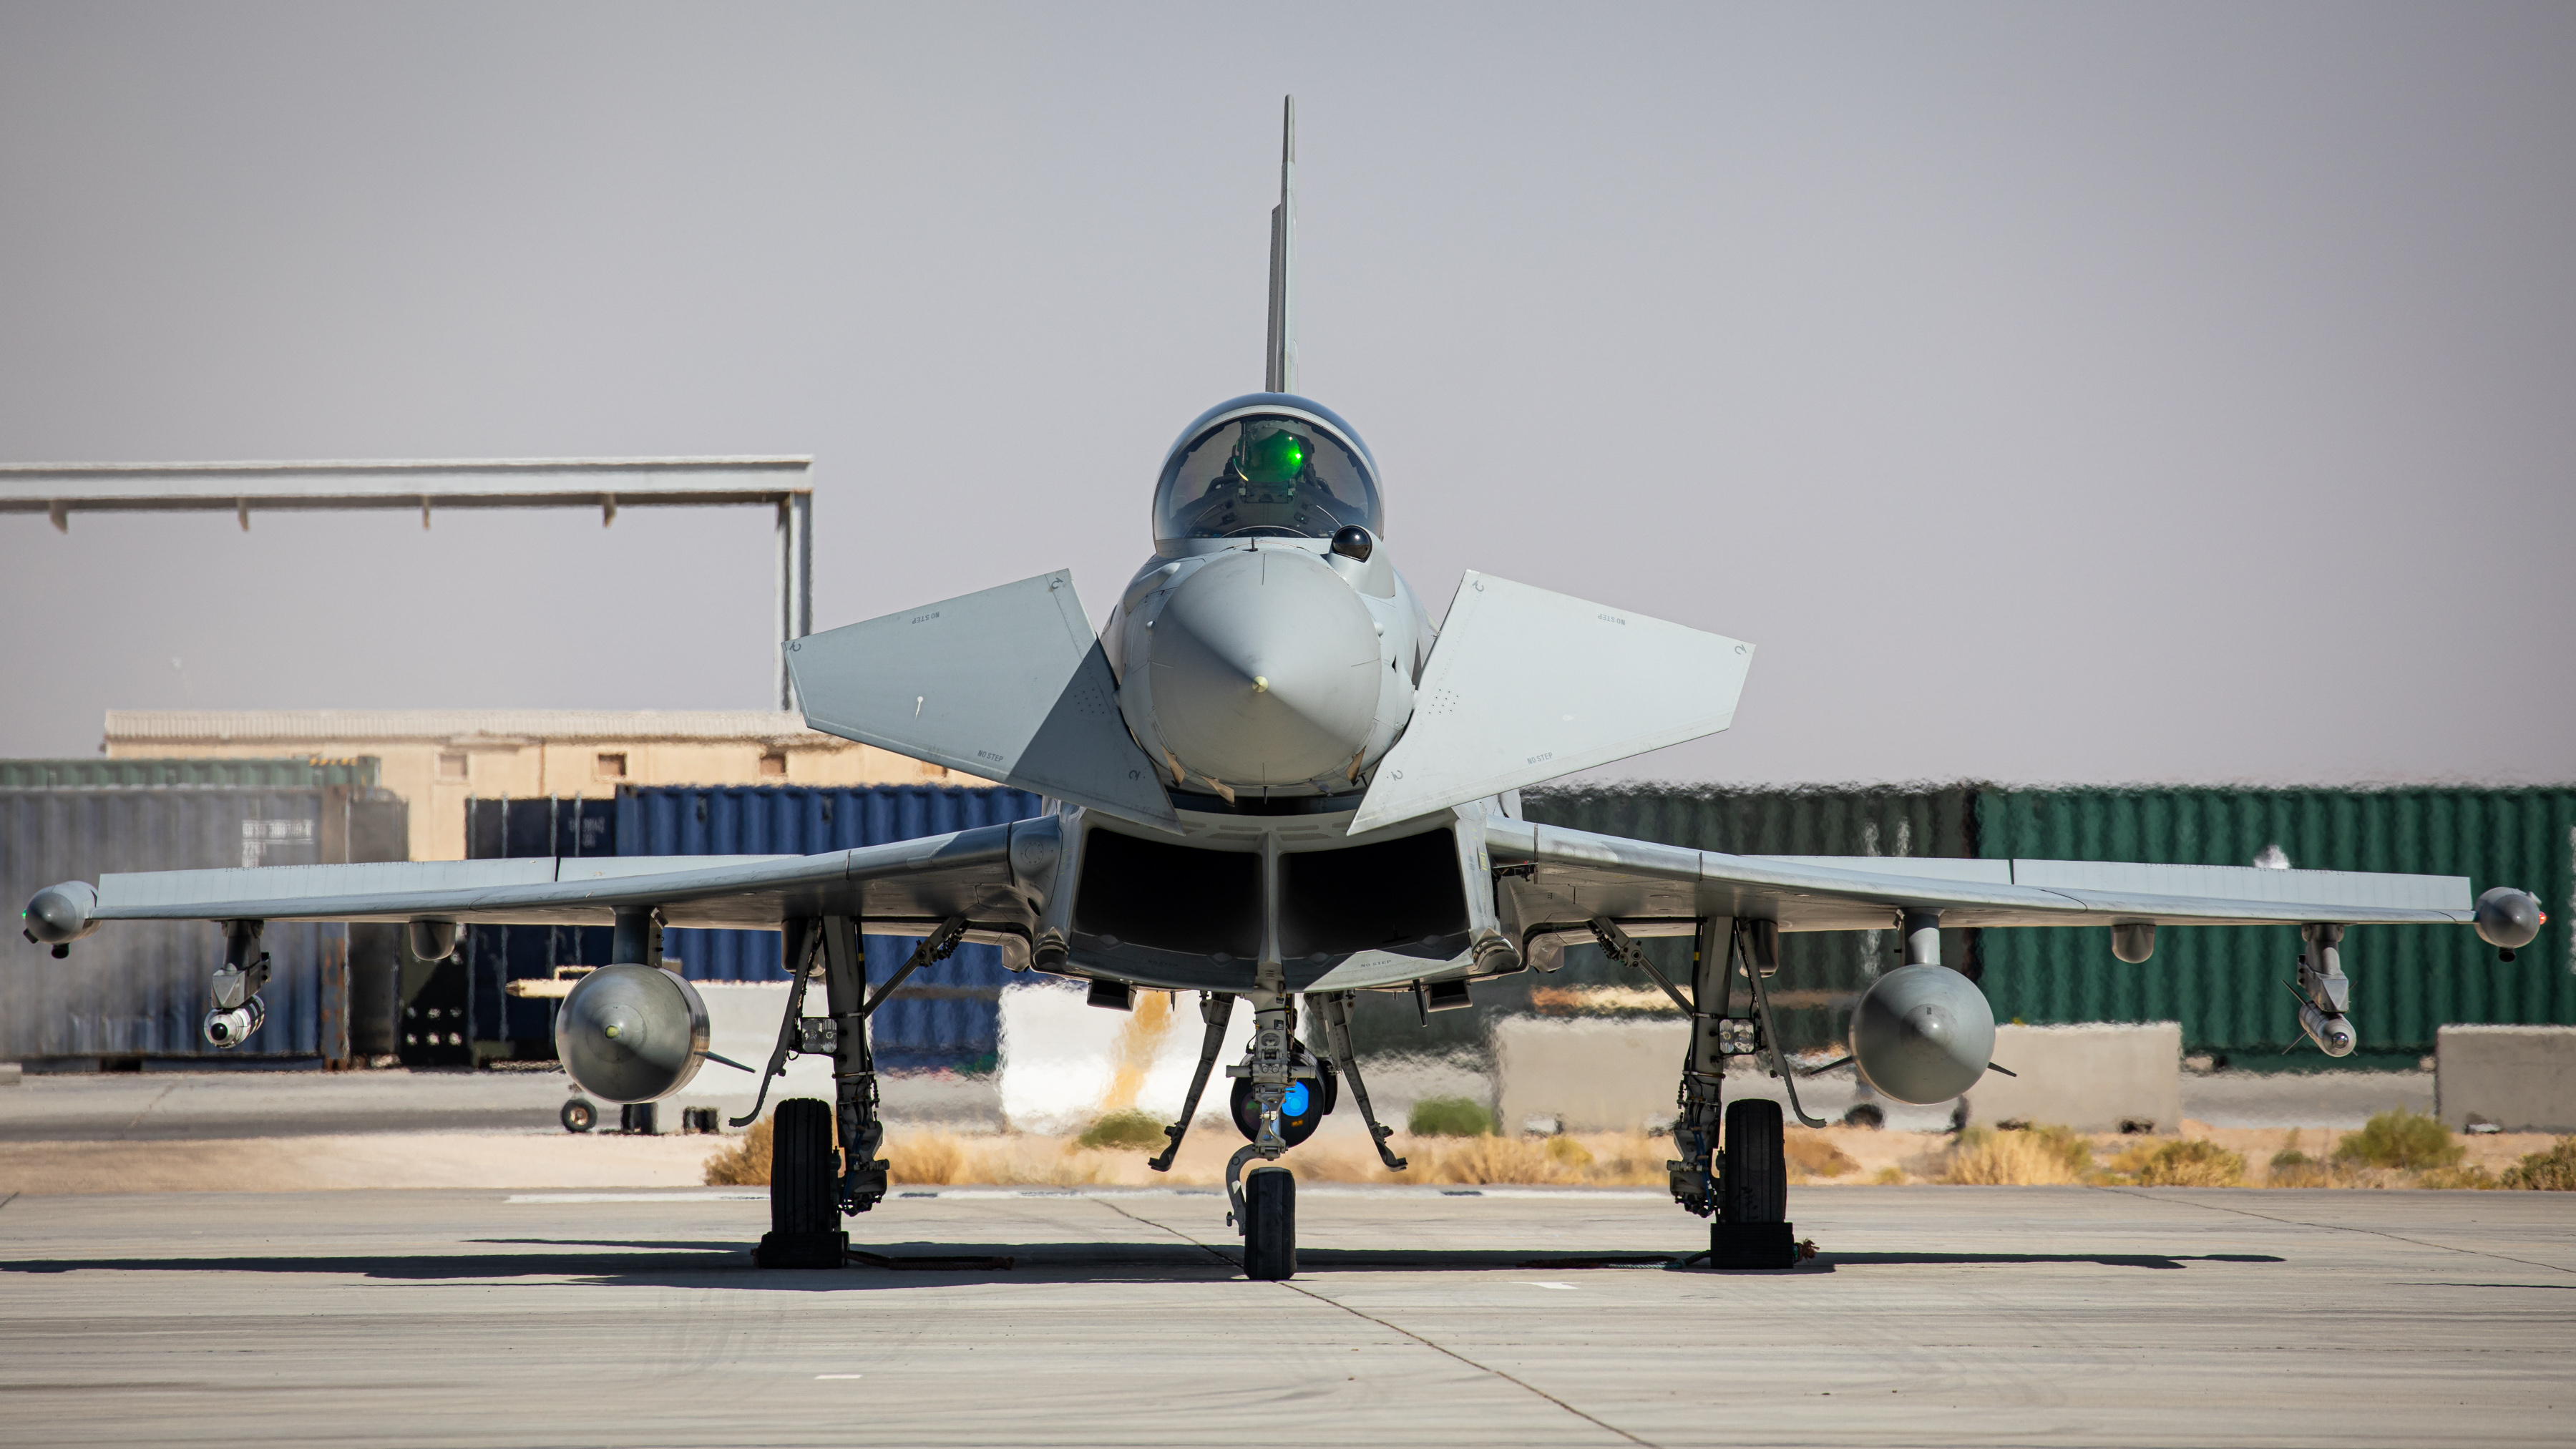 Typhoon on the airfield with crates in the background.